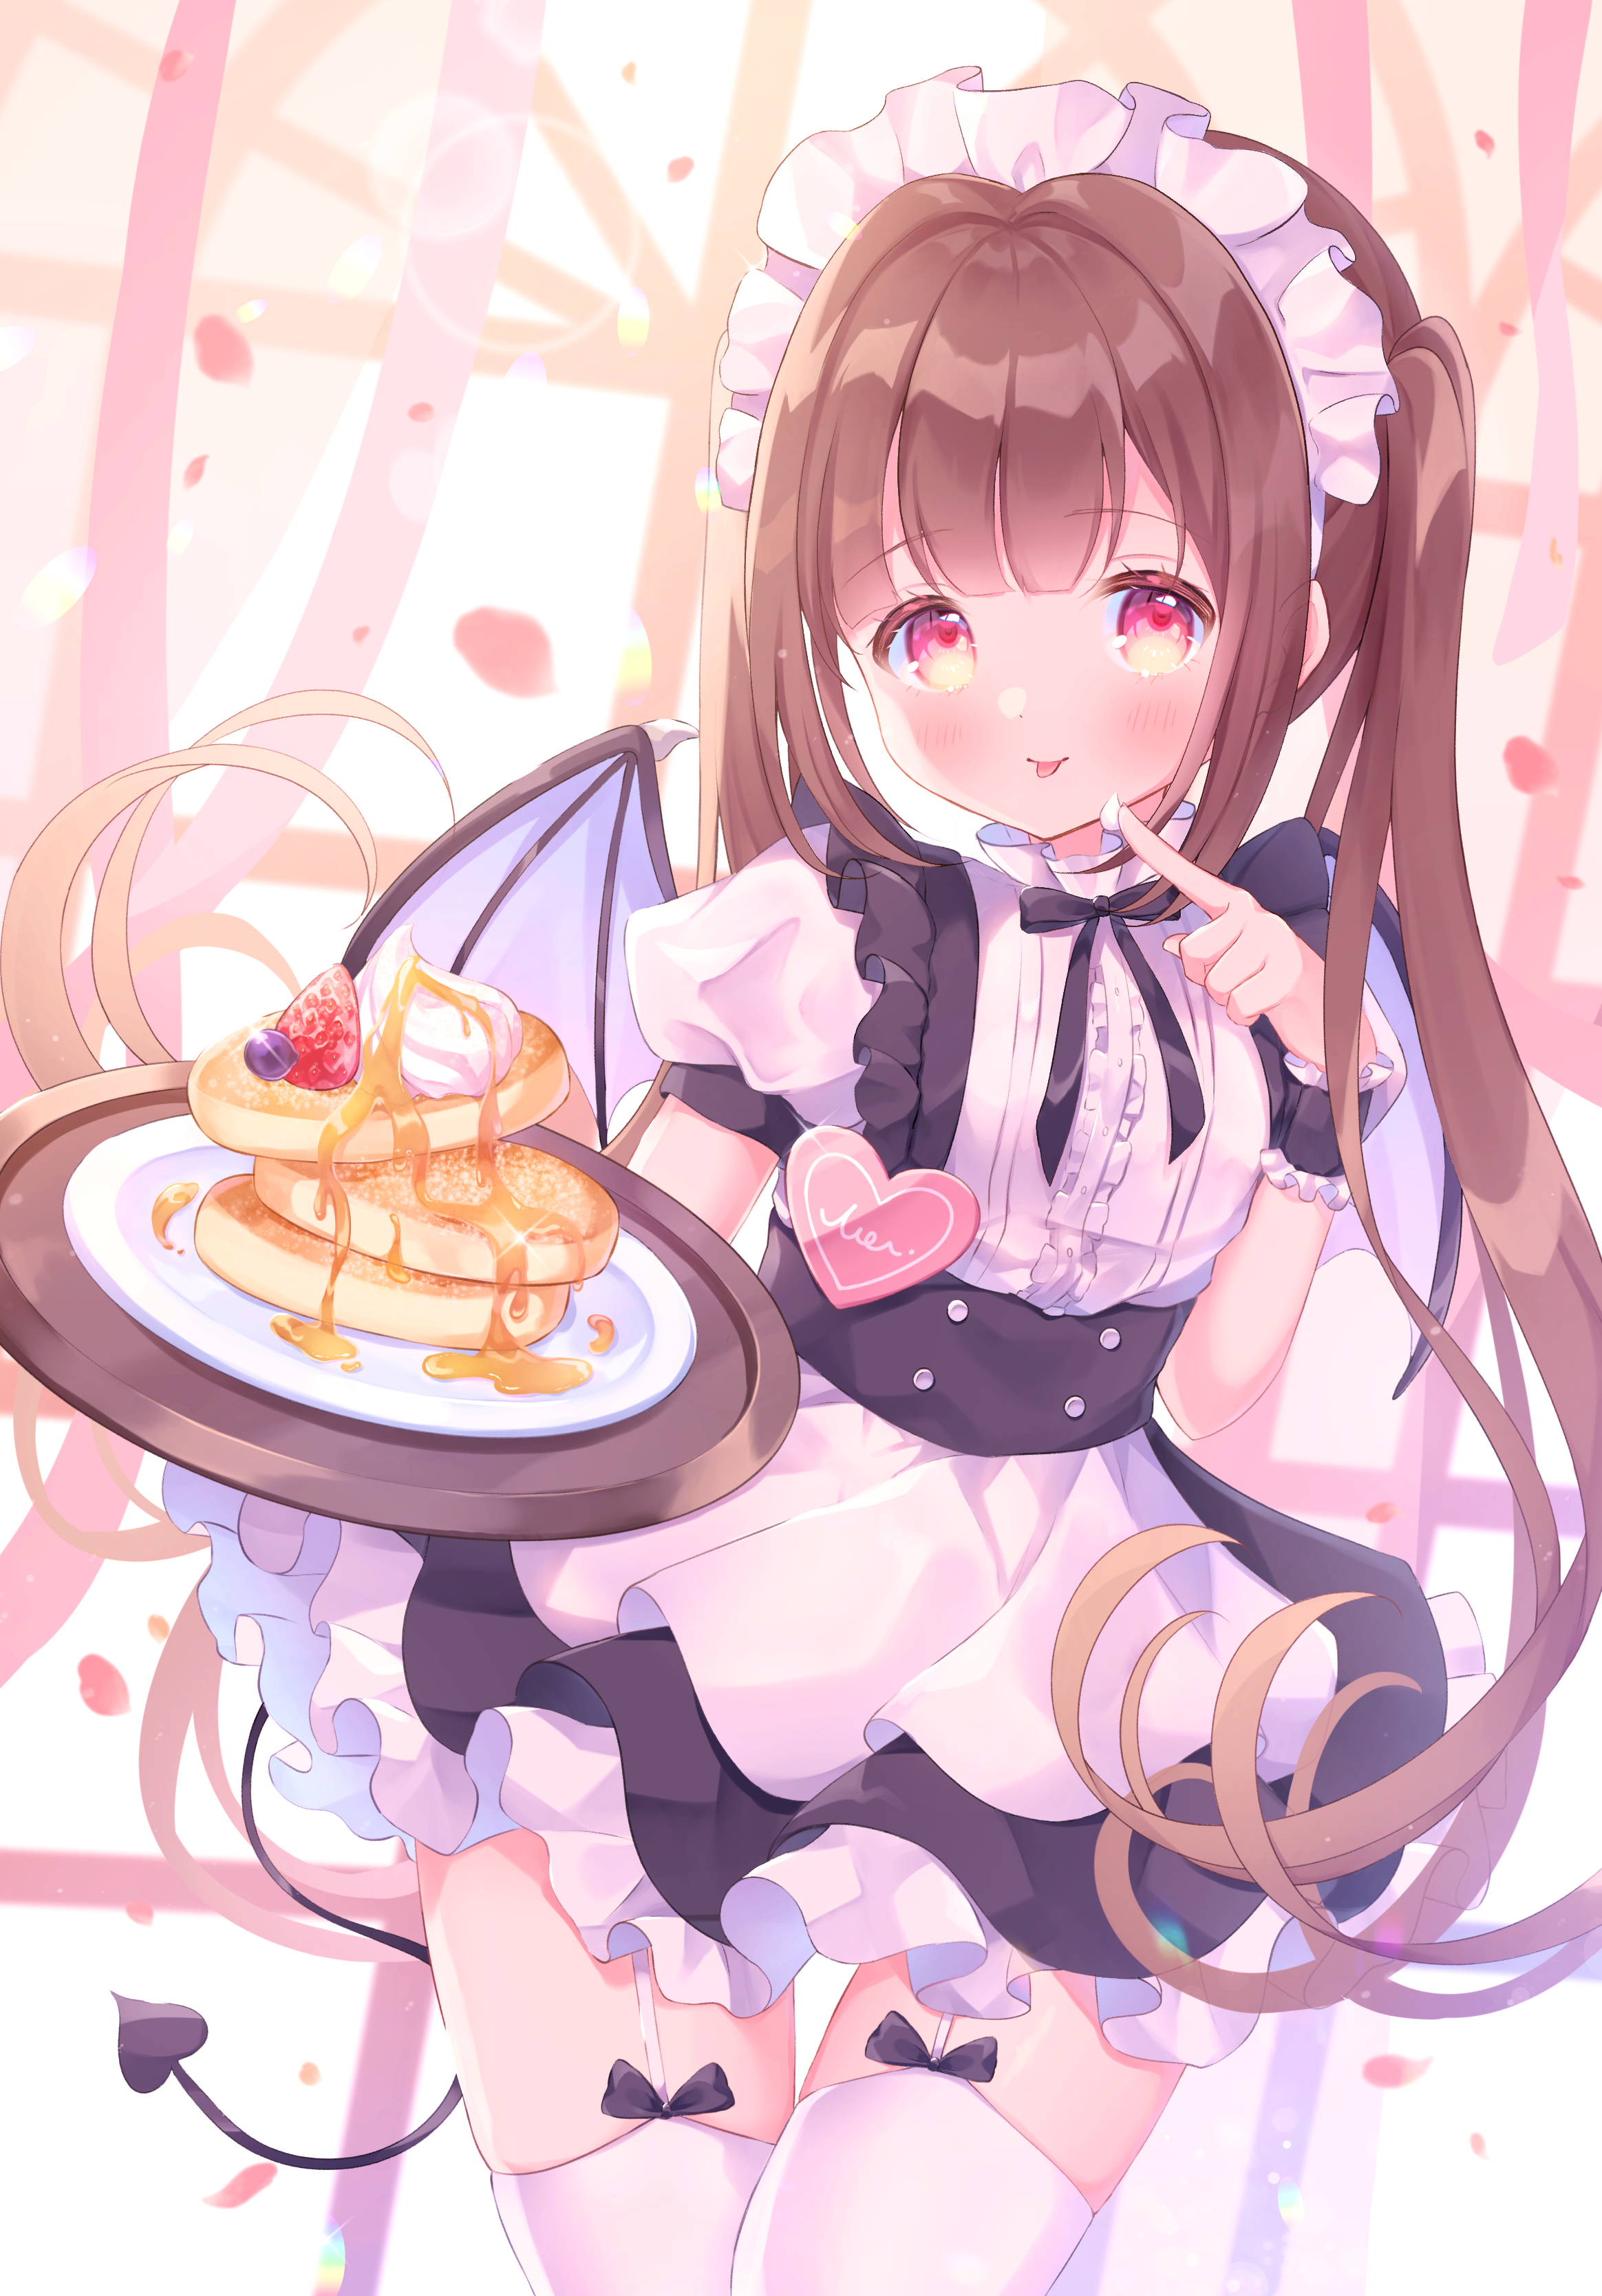 Anime Anime Girls Waitress Brunette Vertical Bat Wings Pancakes Maid Outfit Wings Tail Thigh Highs T 2328x3336